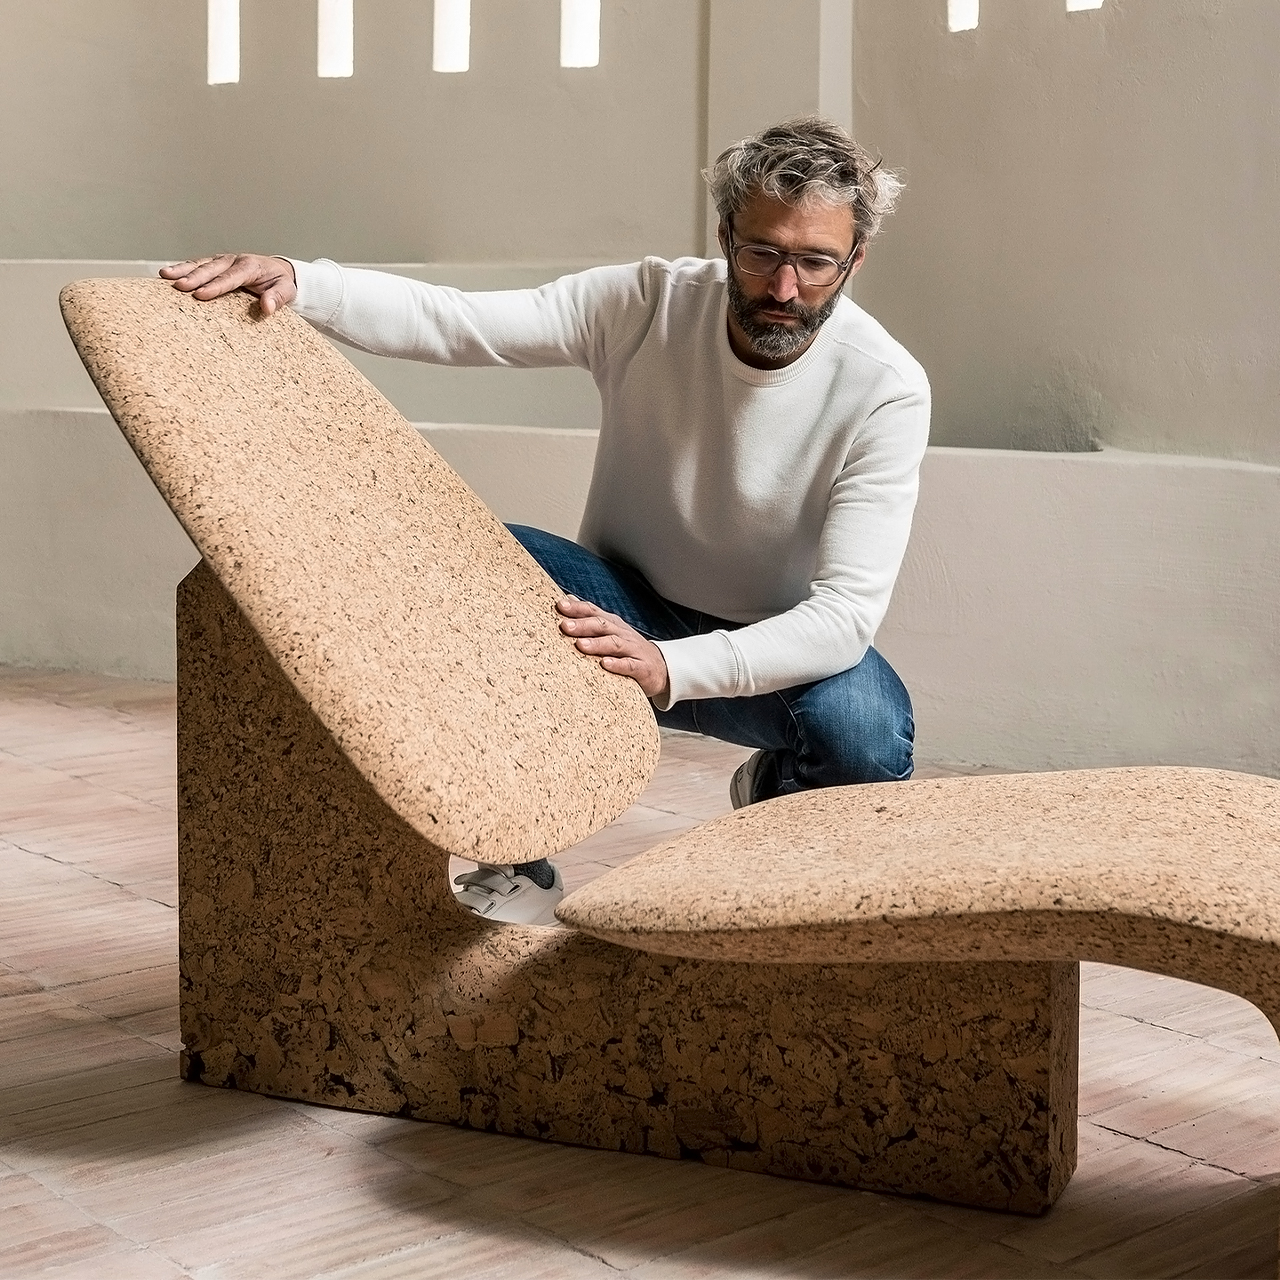 Sustainable Cork Furniture For Eco conscious Living